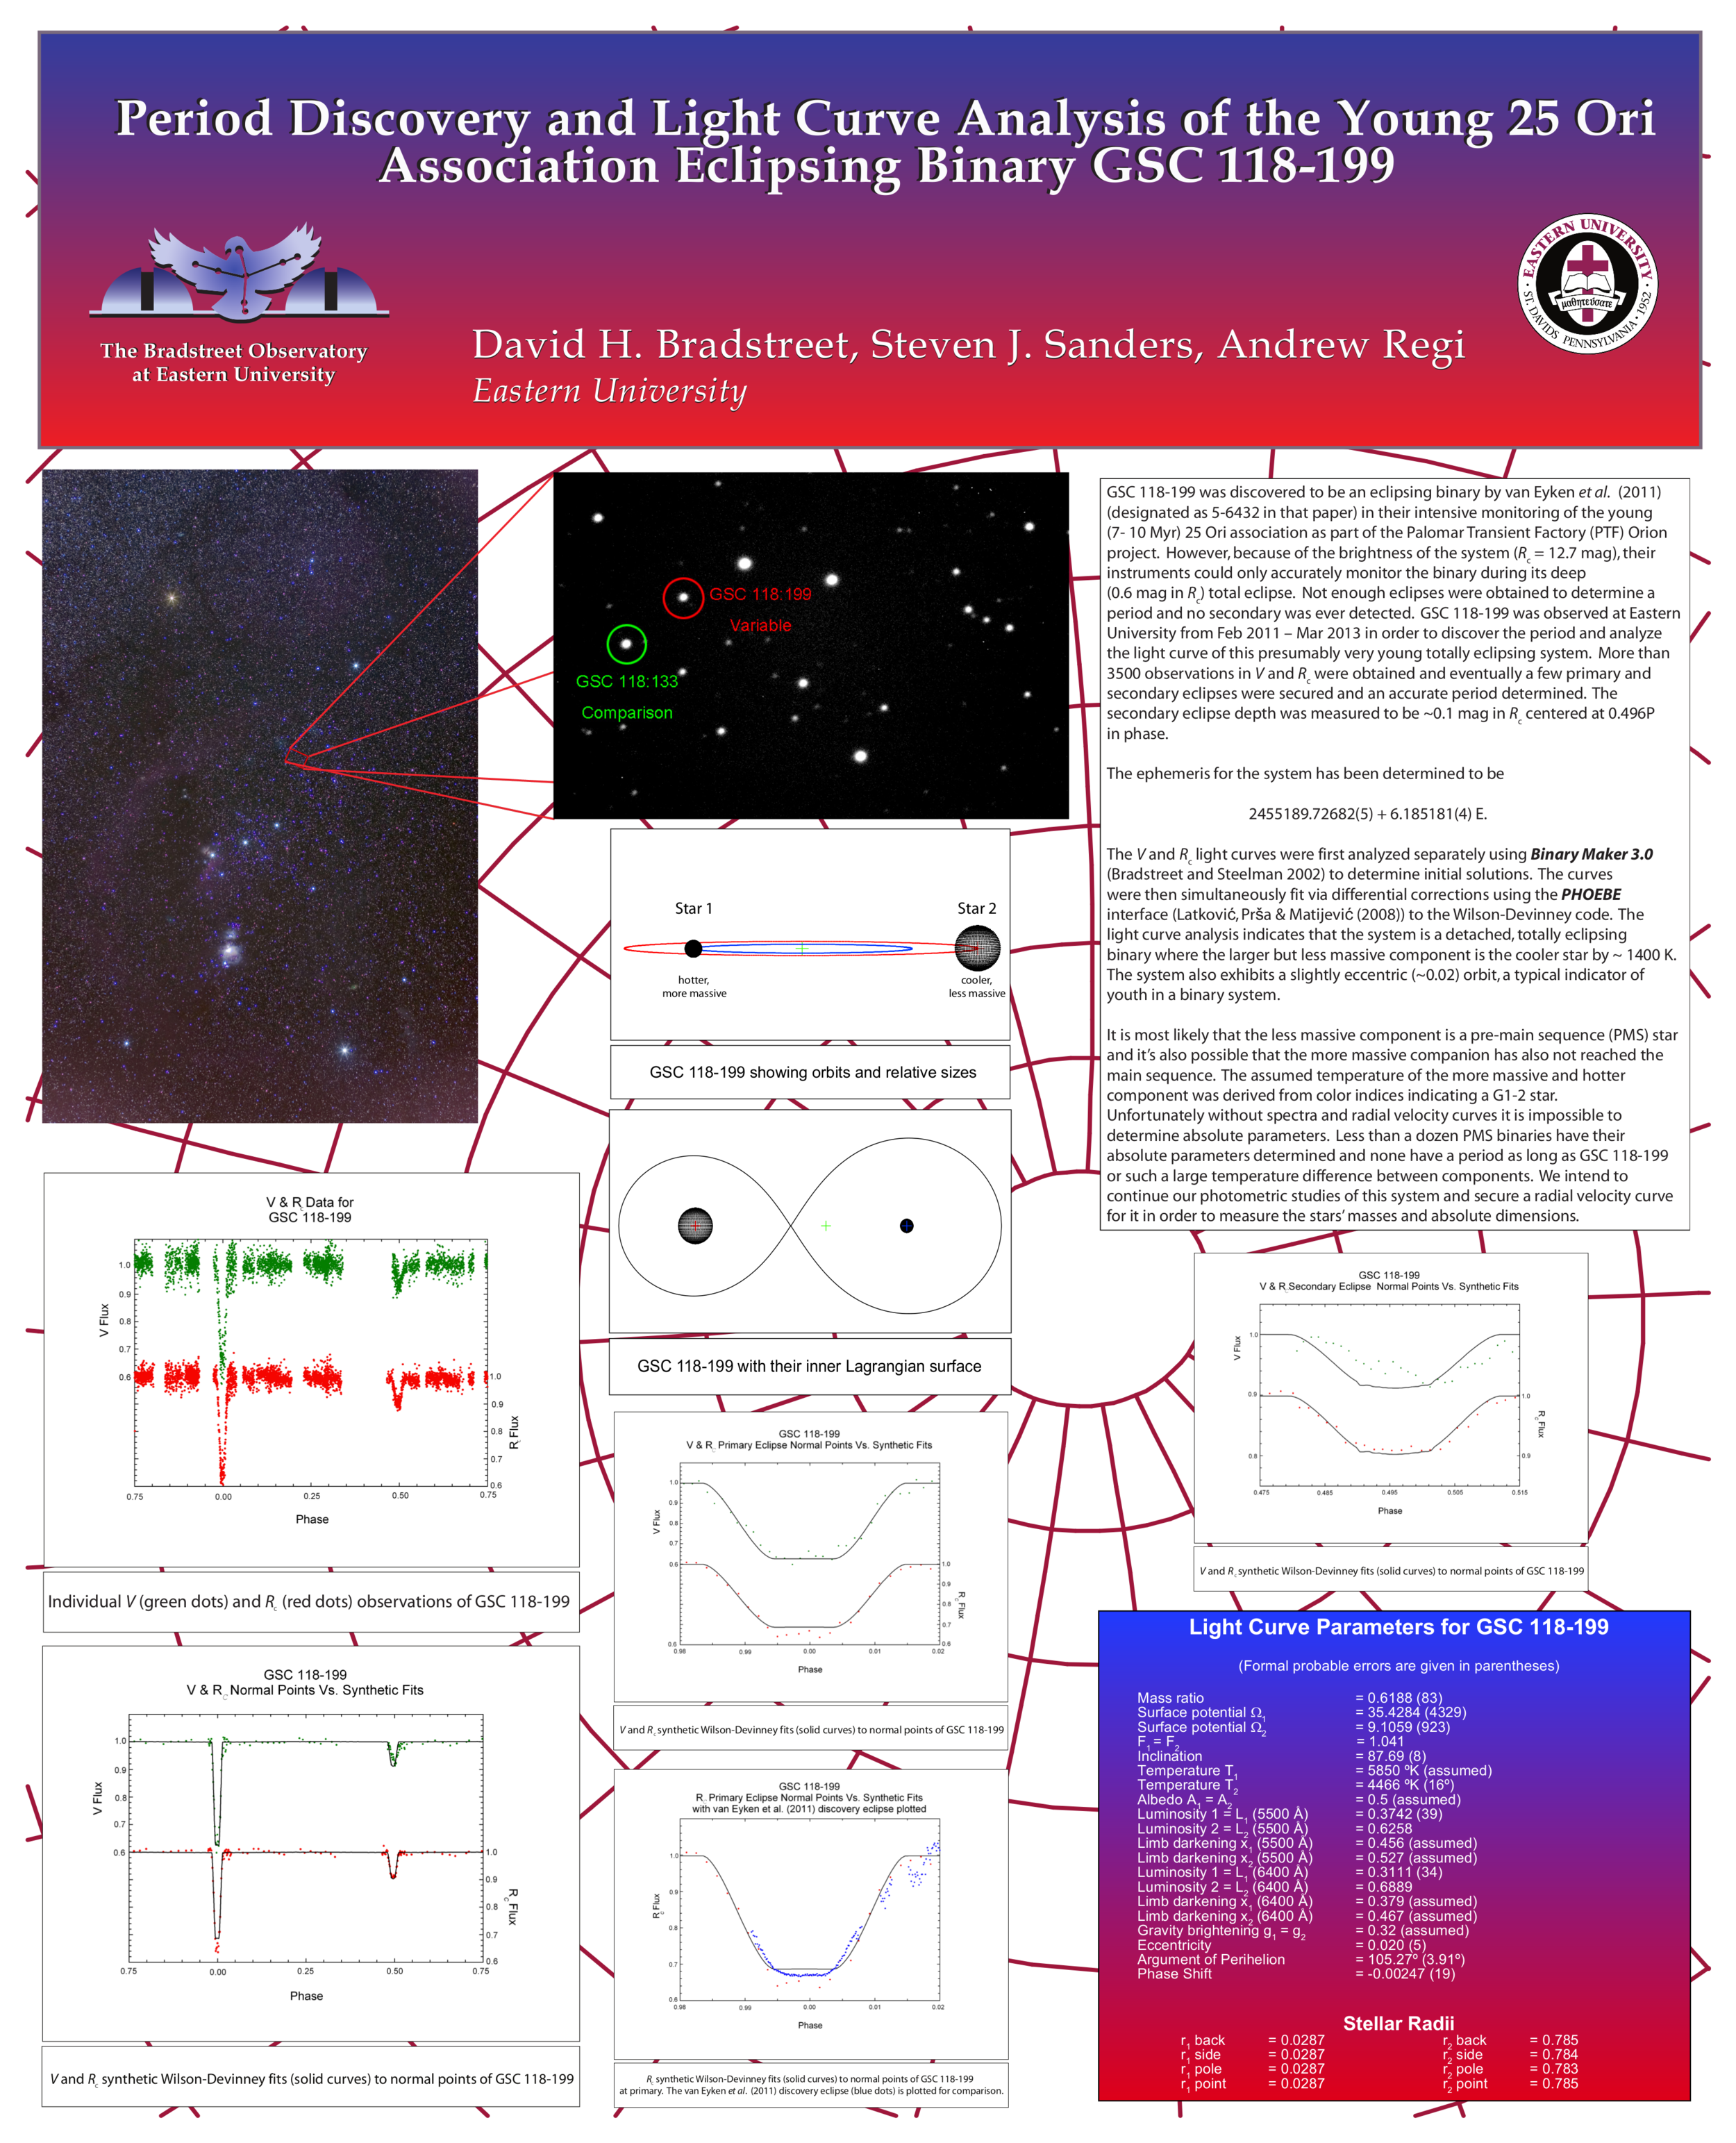 <a href="https://eastern-astronomy.squarespace.com/s/Orion-Star-poster.pdf">GSC 118-199</a>